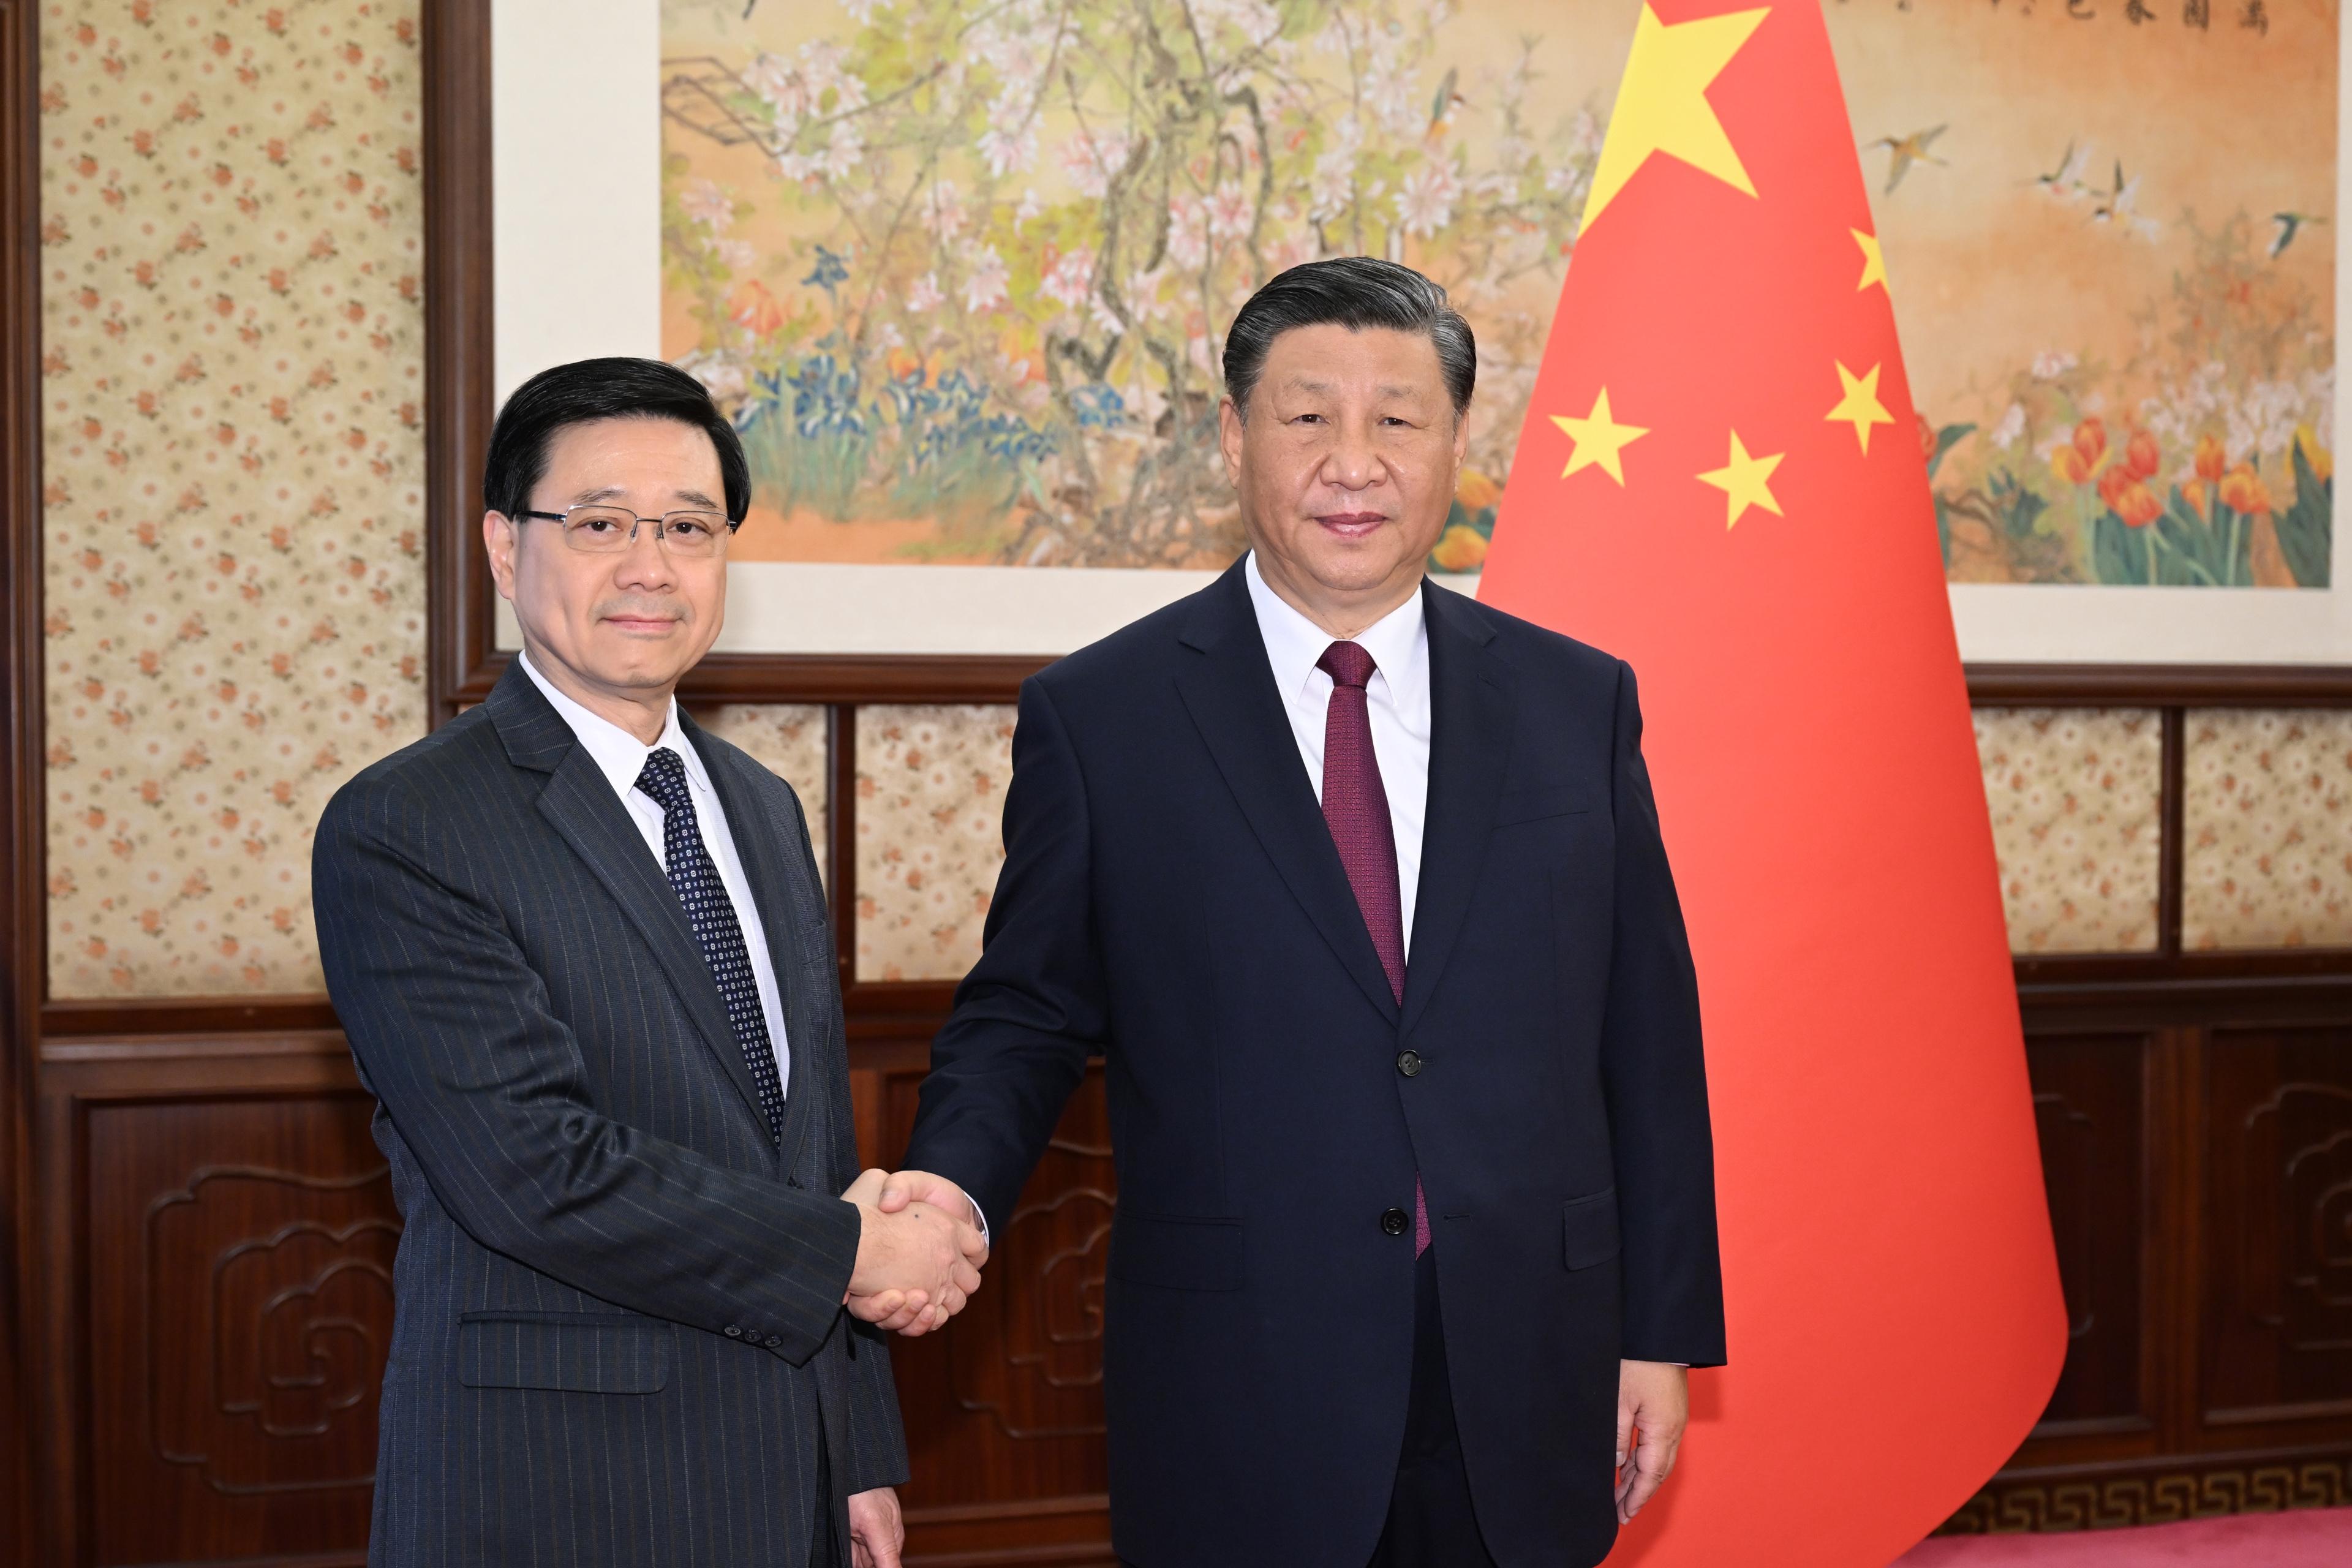 The Chief Executive, Mr John Lee (left), briefed President Xi Jinping (right) in Beijing today (December 18) on the latest economic, social and political situation in Hong Kong. They are pictured before the meeting.